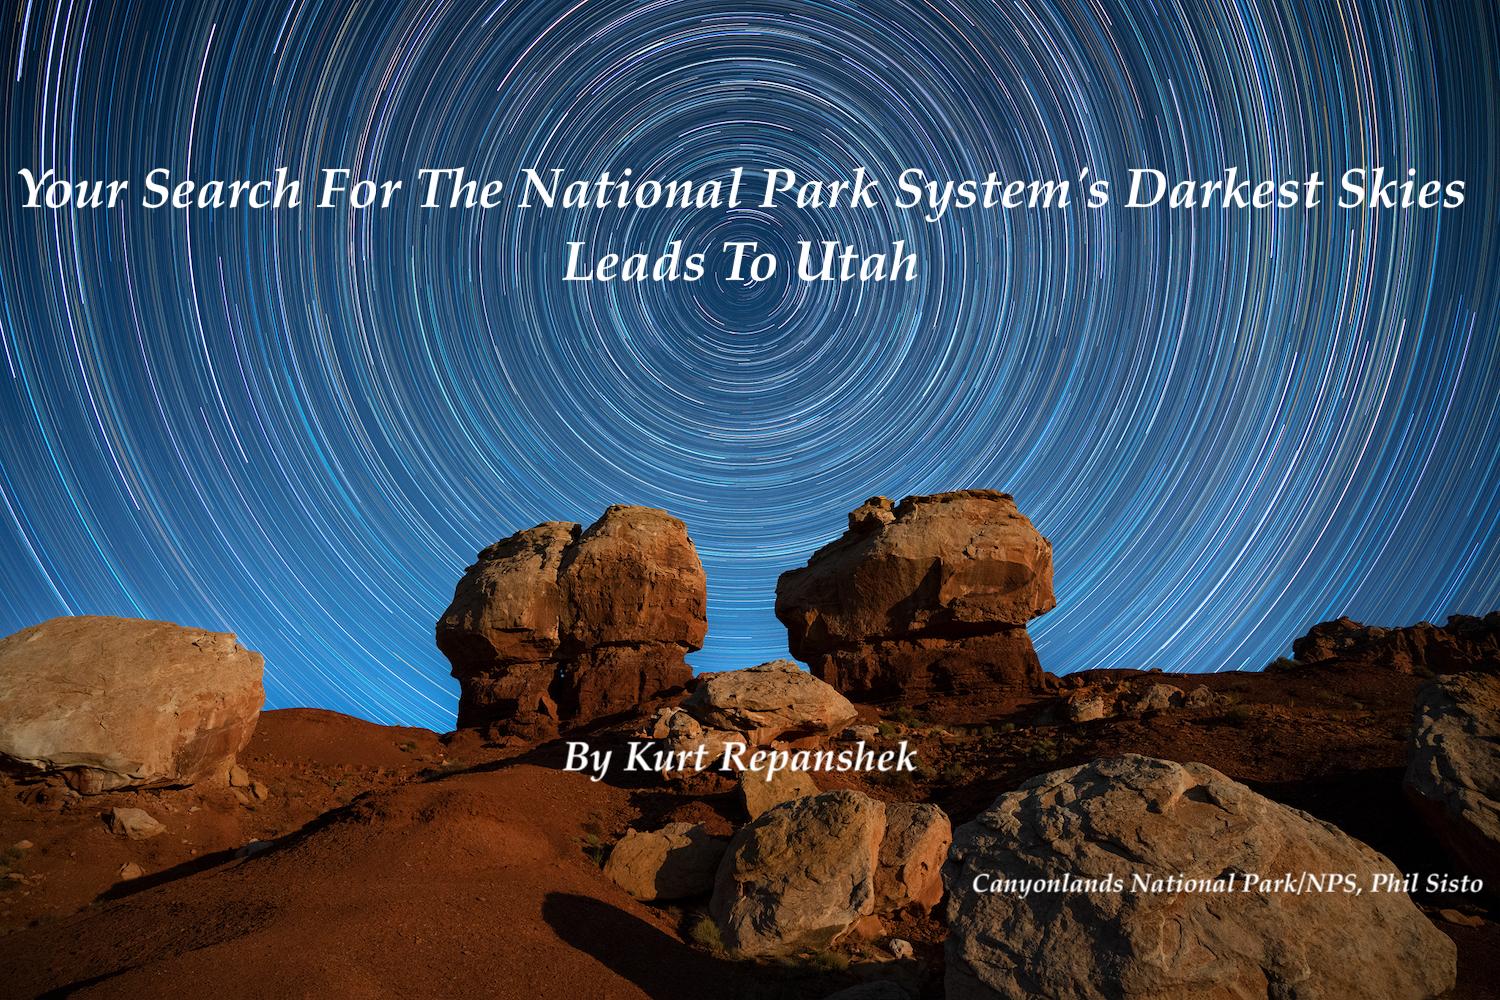 Most of the National Park System's darkest skies can be found in Utah/NPS, Phil Sisto